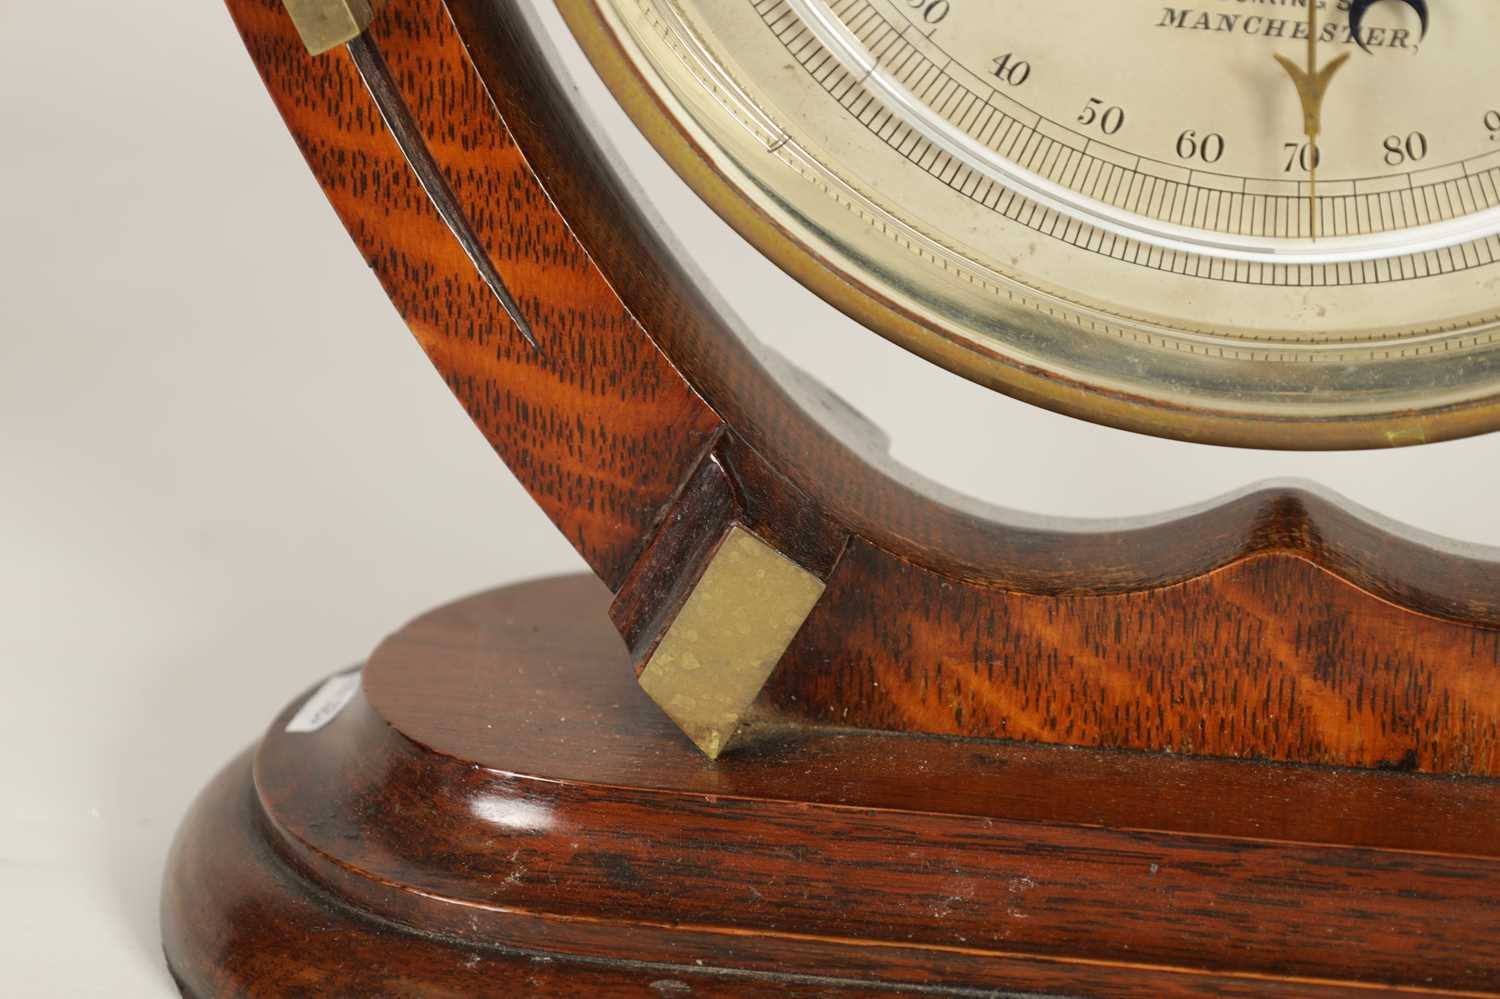 AN UNUSUAL LATE 19TH CENTURY BAROMETER OF EQUESTRIAN INTEREST - Image 7 of 12